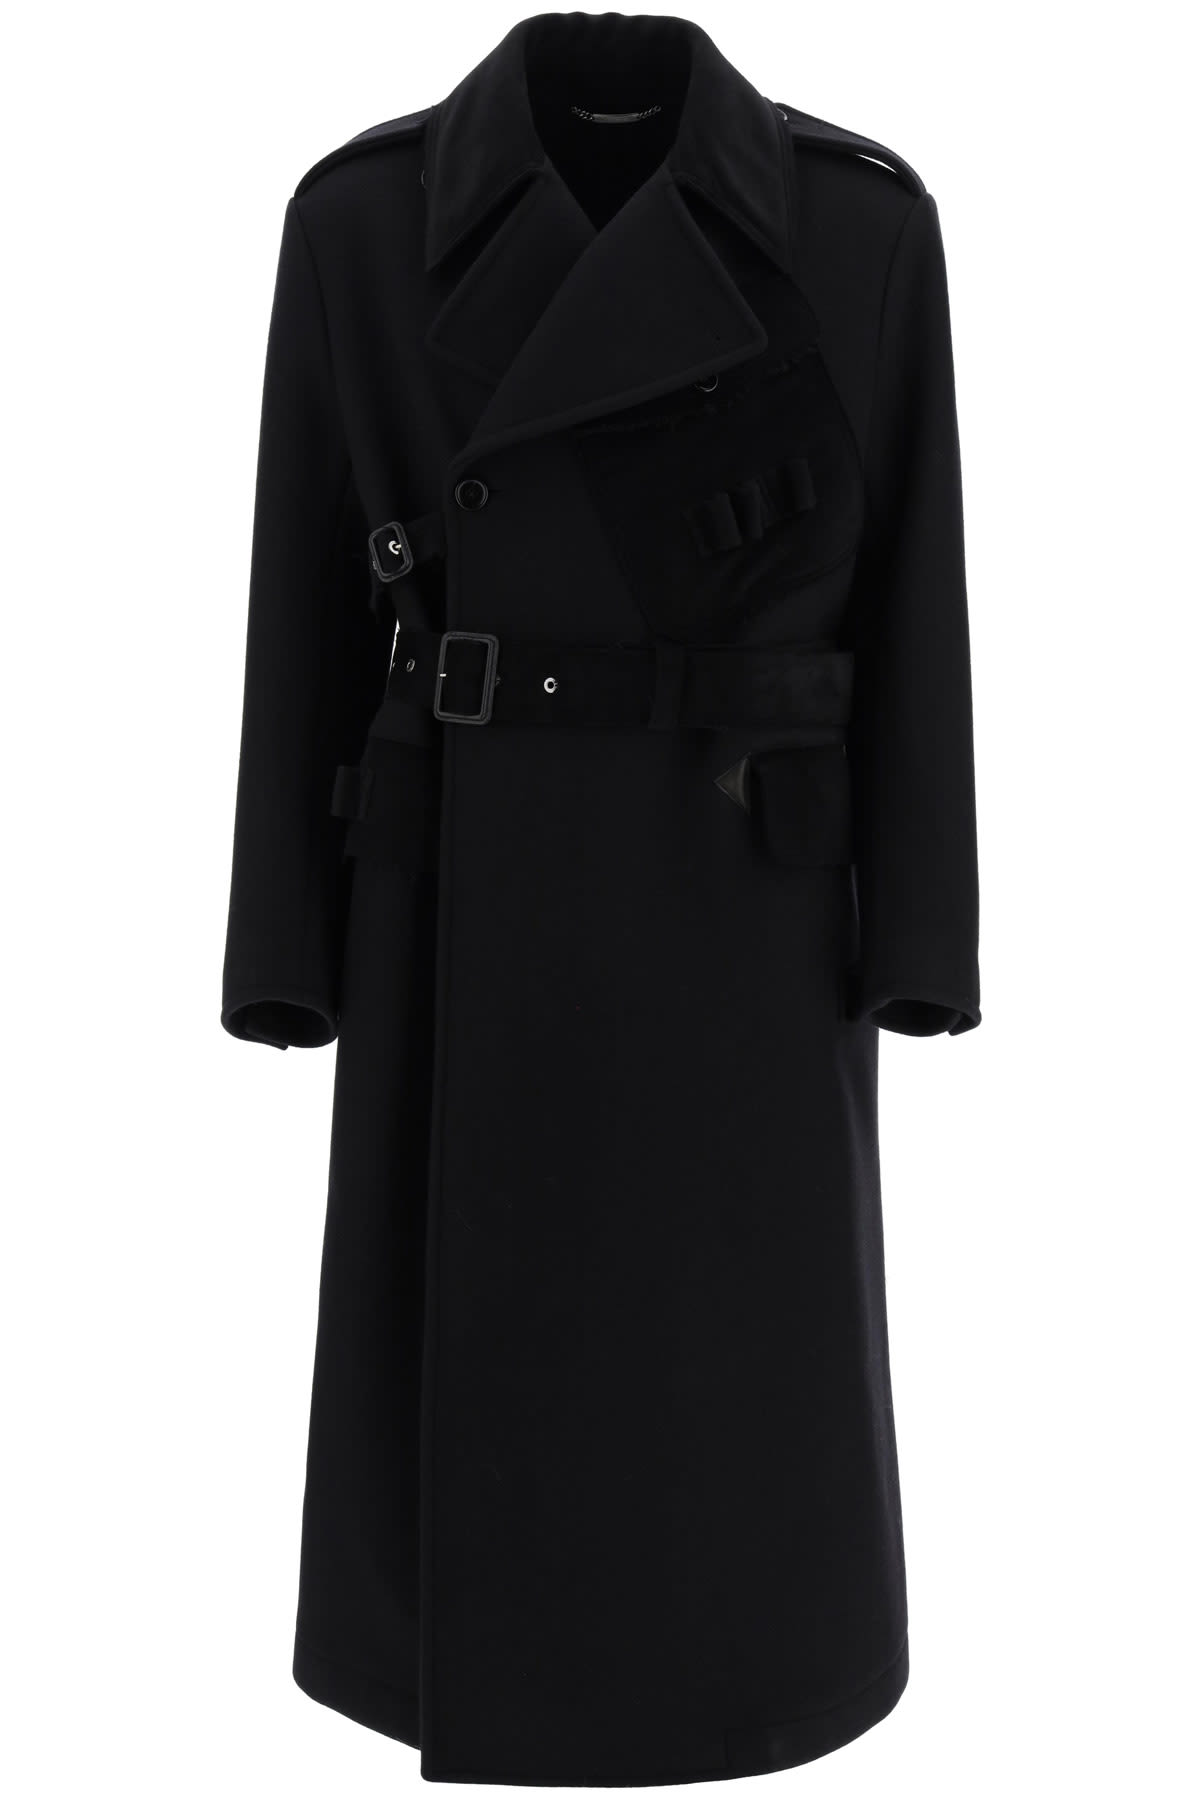 Dolce & Gabbana Double-breasted Coat With Belt